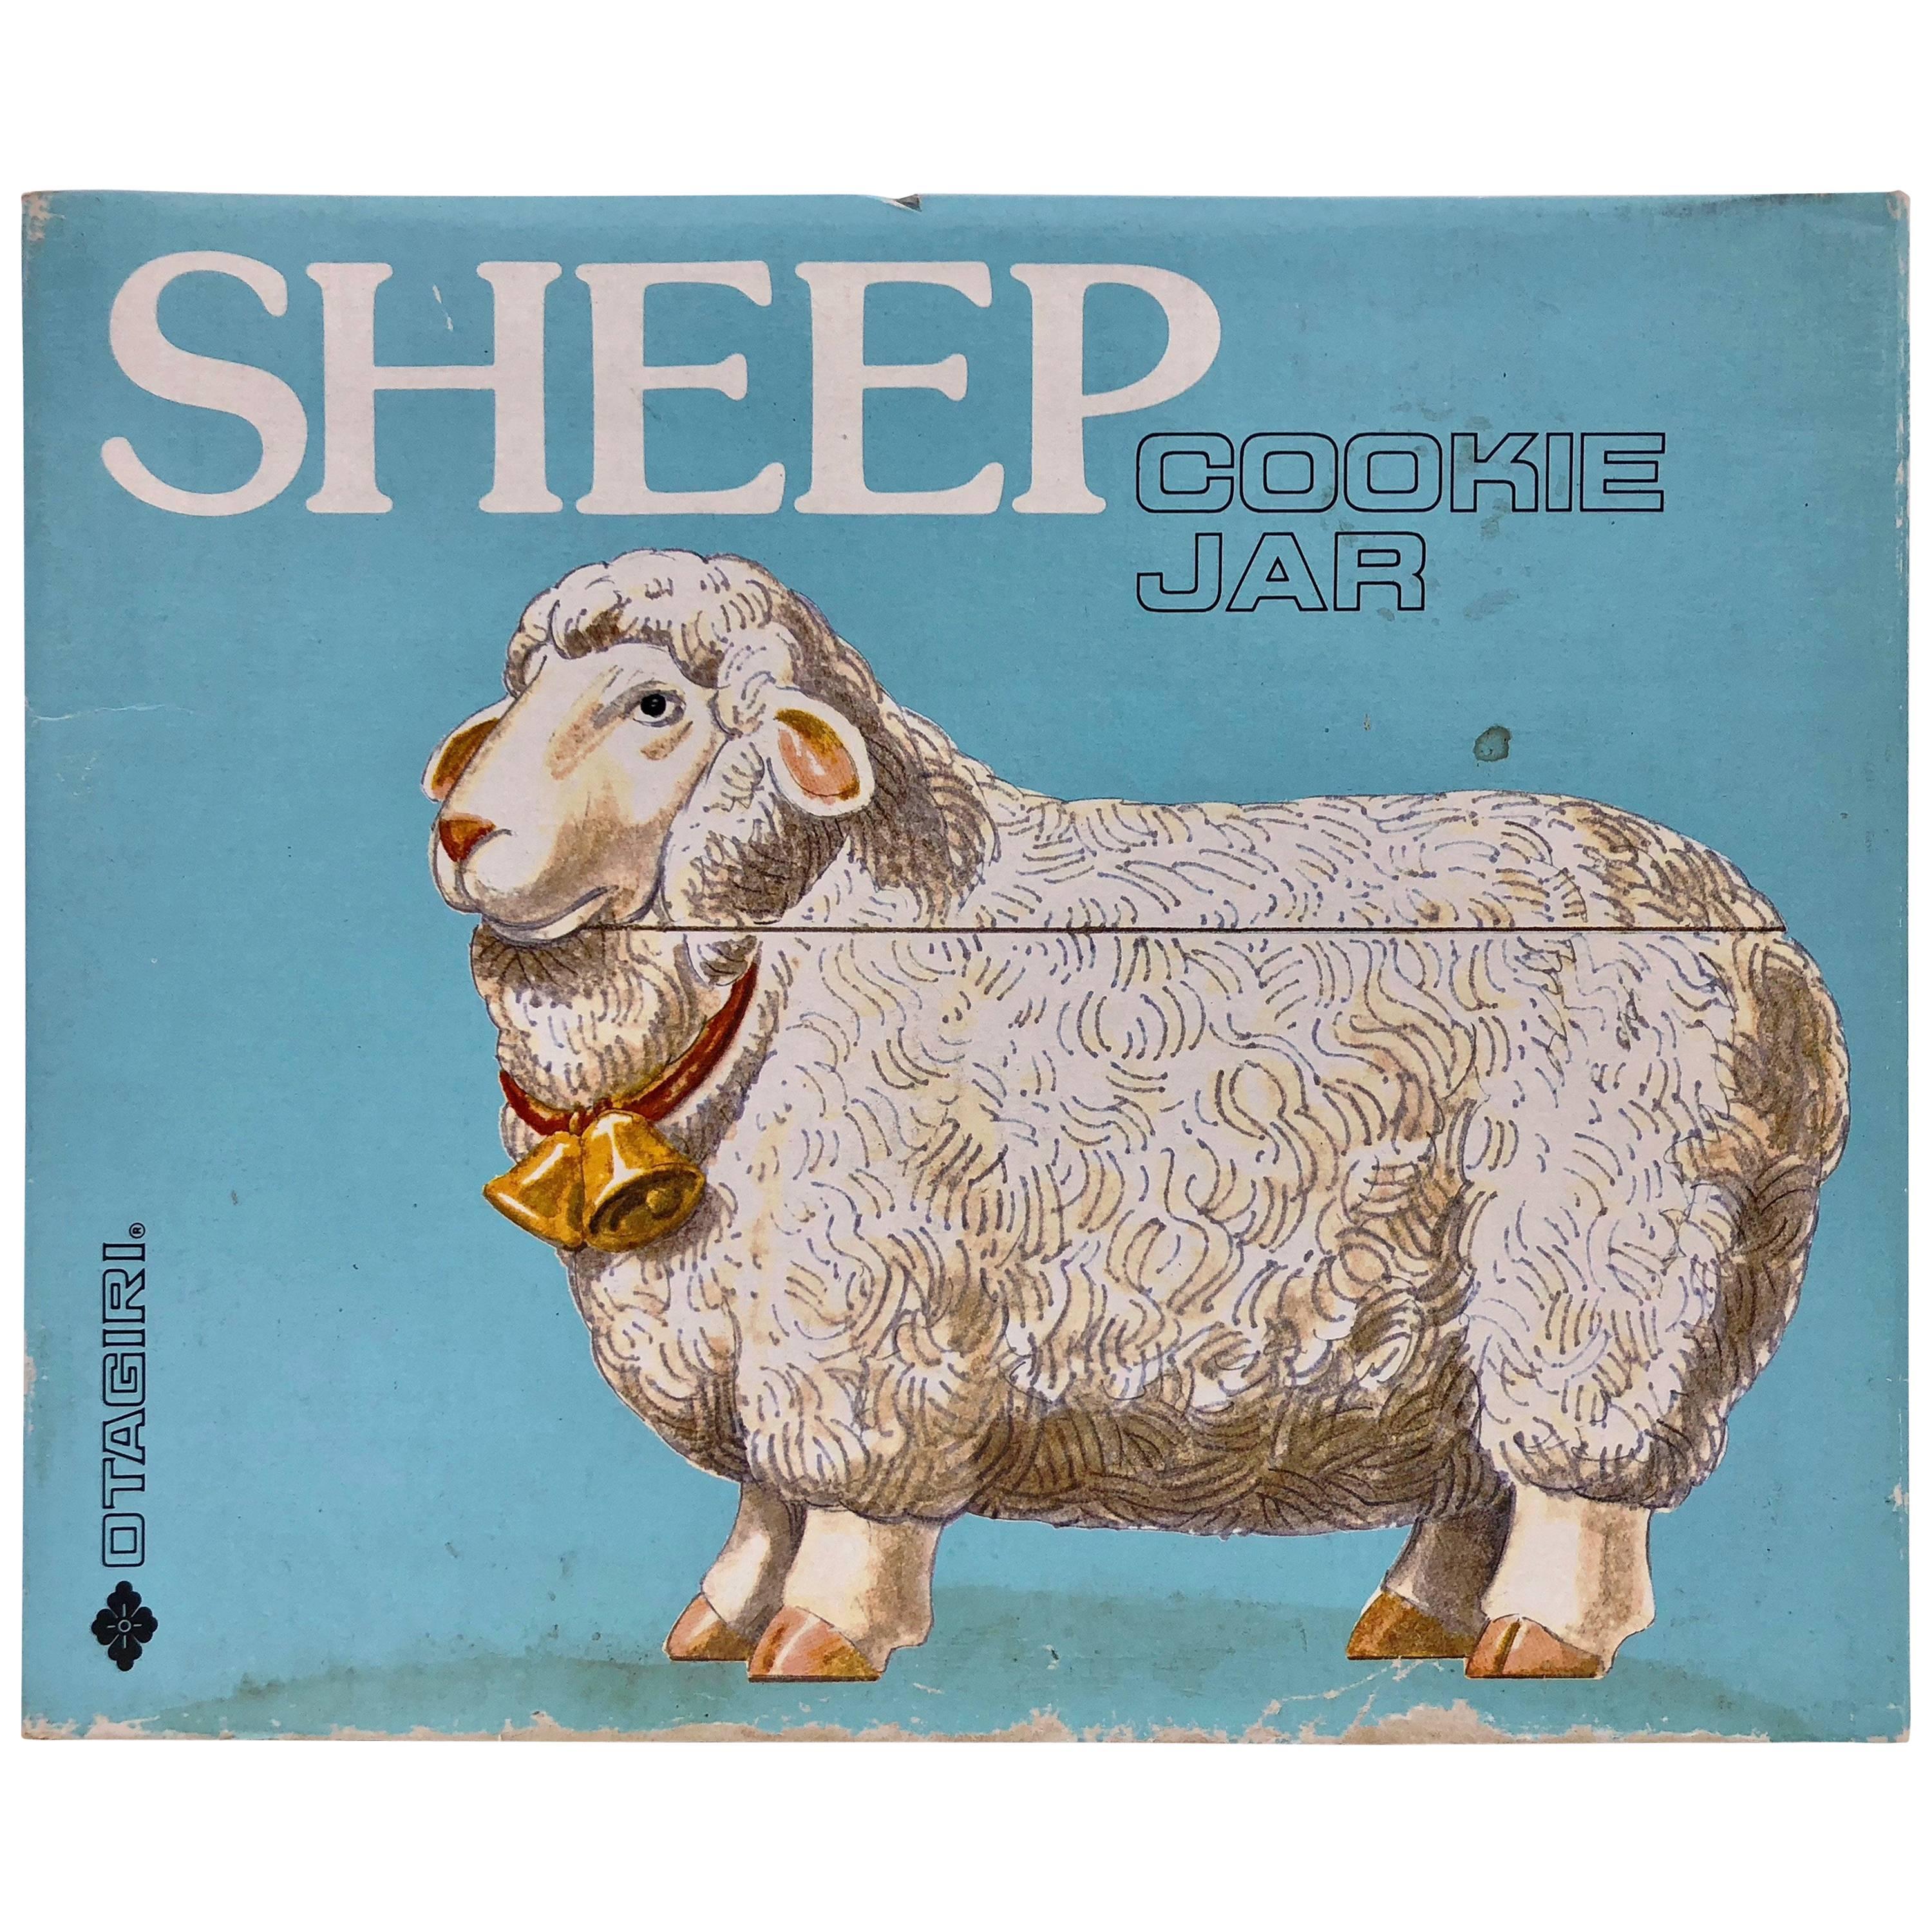 Sheep Ceramic Cookie Jar Handcrafted by Otagiri, Japan, 1984 in It's Box For Sale